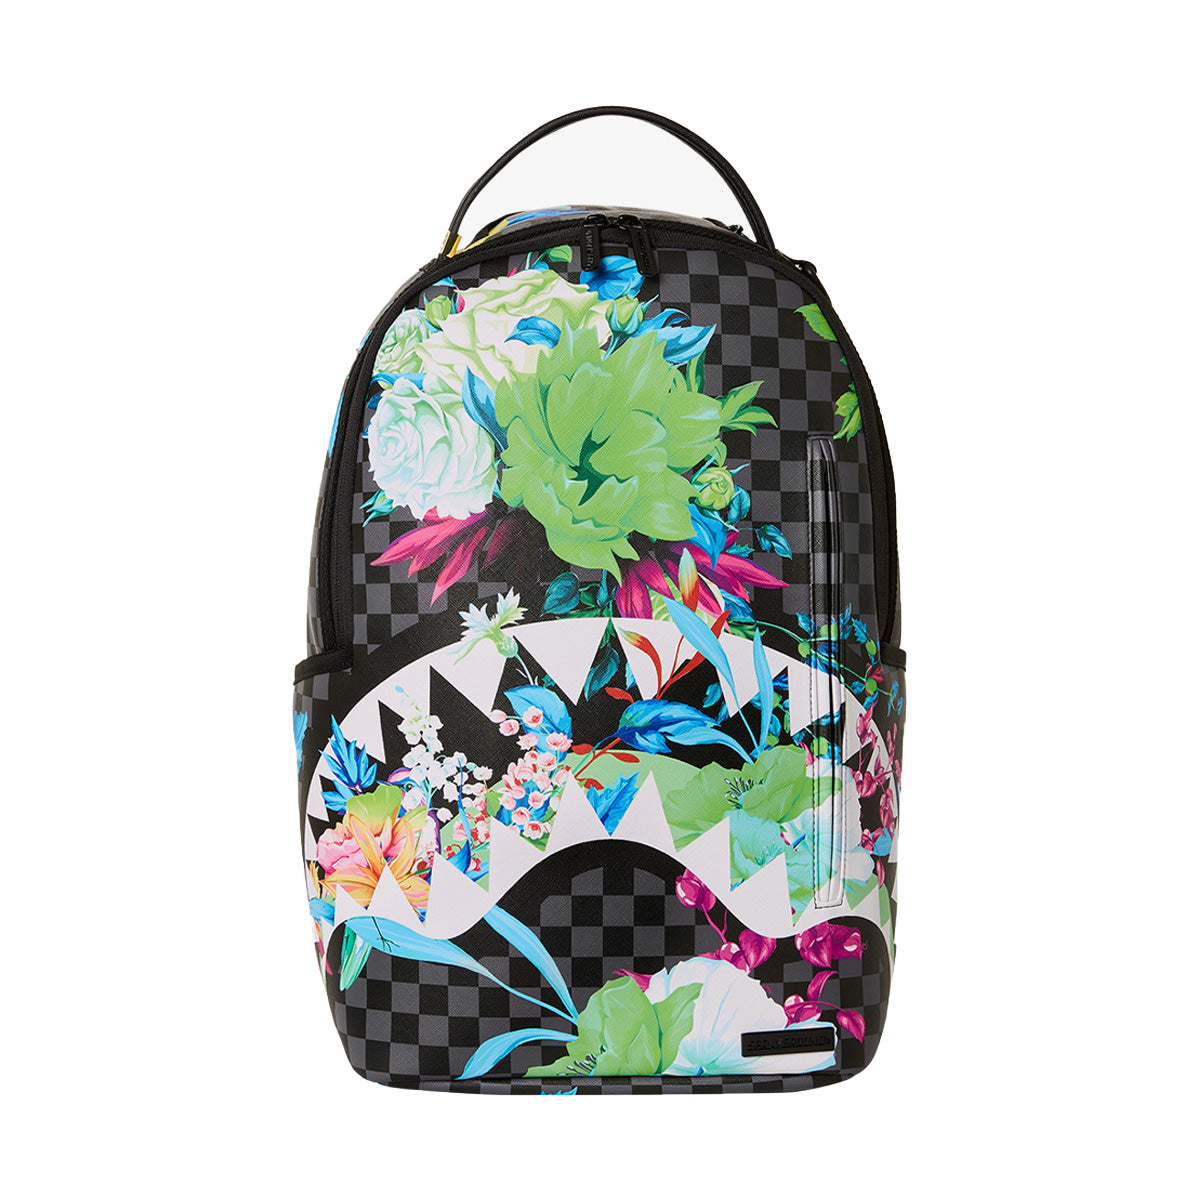 SPRAYGROUND: backpack for woman - Multicolor  Sprayground backpack  910B5077NSZ online at